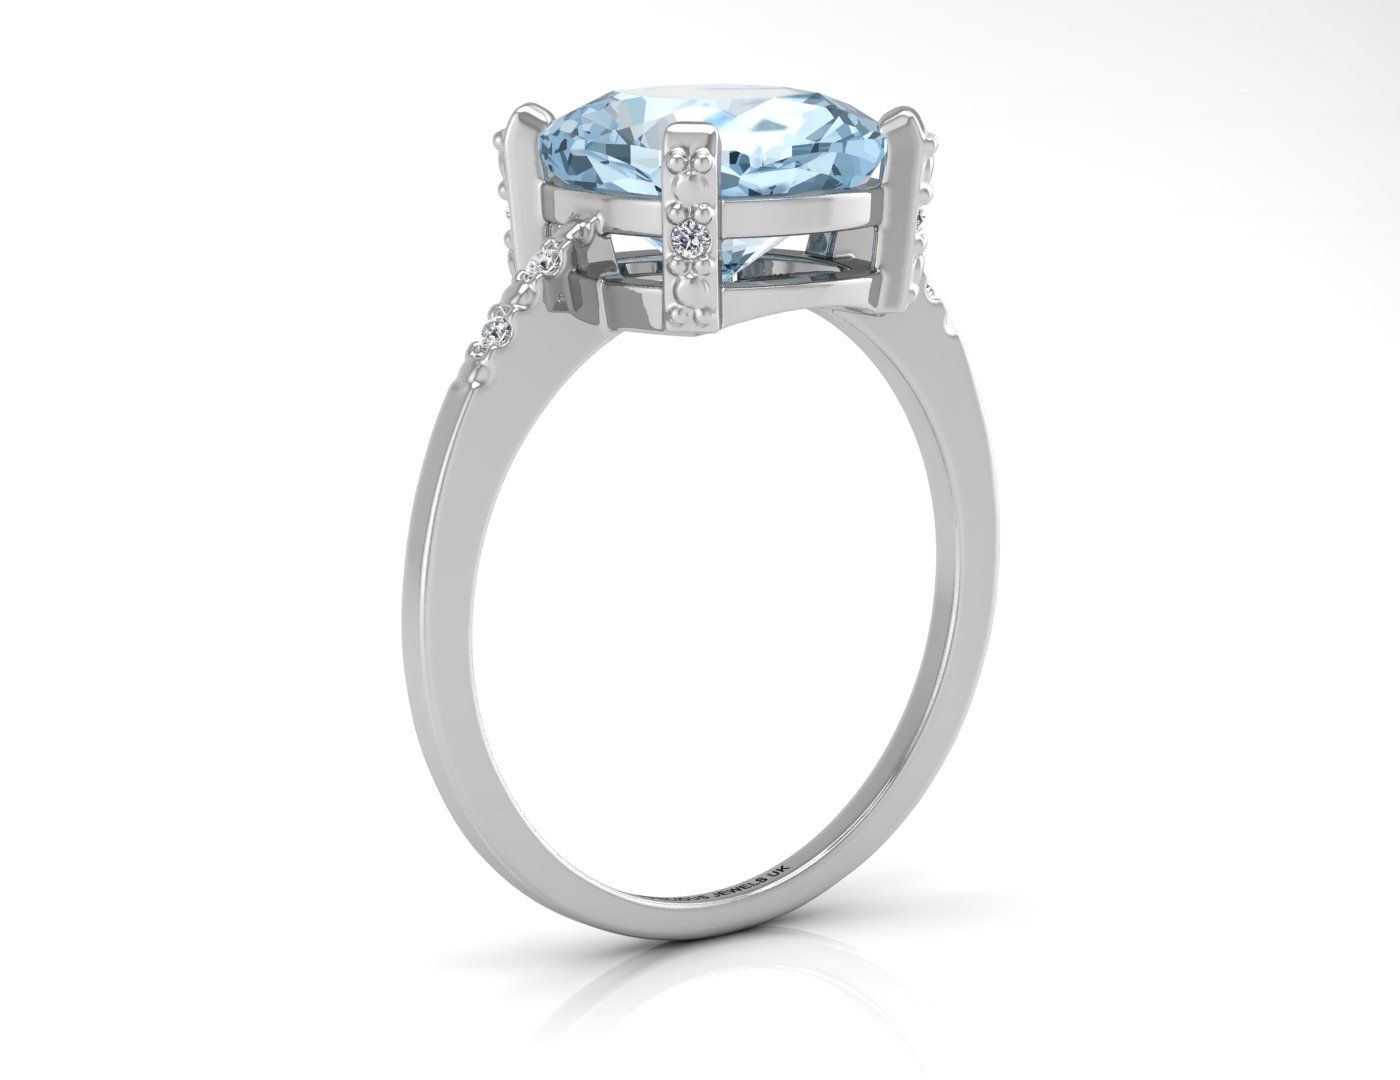 9ct White Gold Diamond And Blue Topaz Ring 0.04 Carats - Image 2 of 4